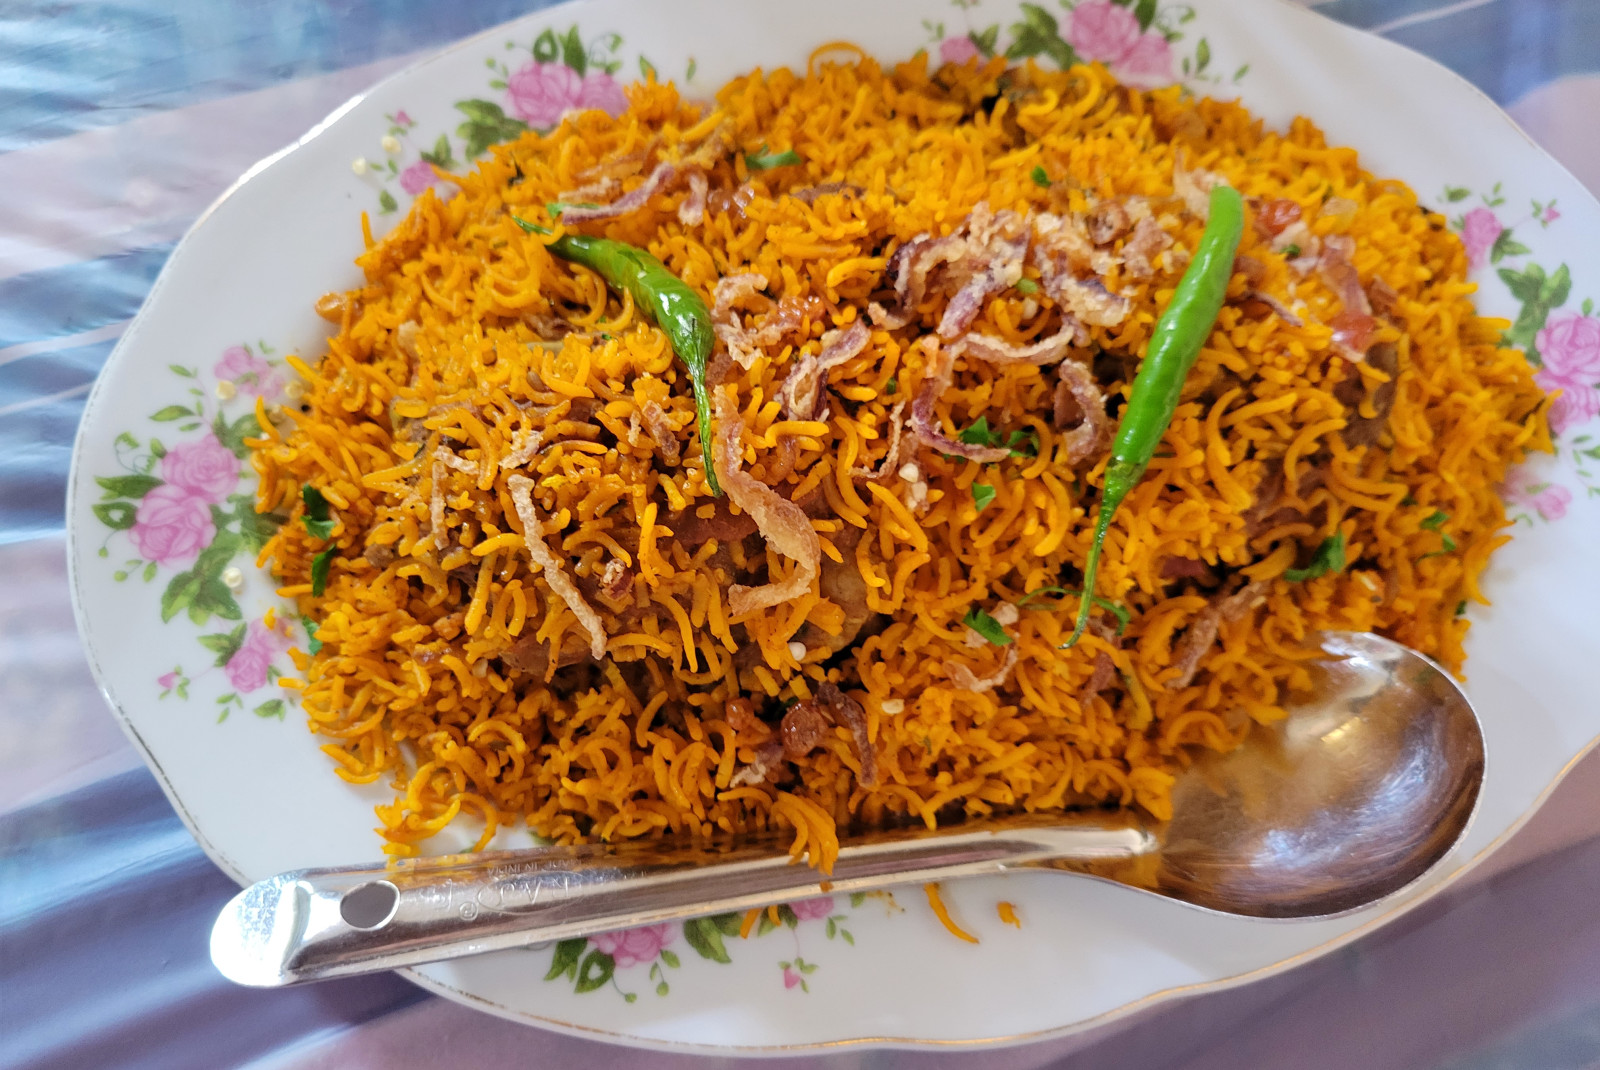 A yellow, saffron rice and green bean dish in the UAE served on a white plate with green and pink floral patterns and a silver spoon.